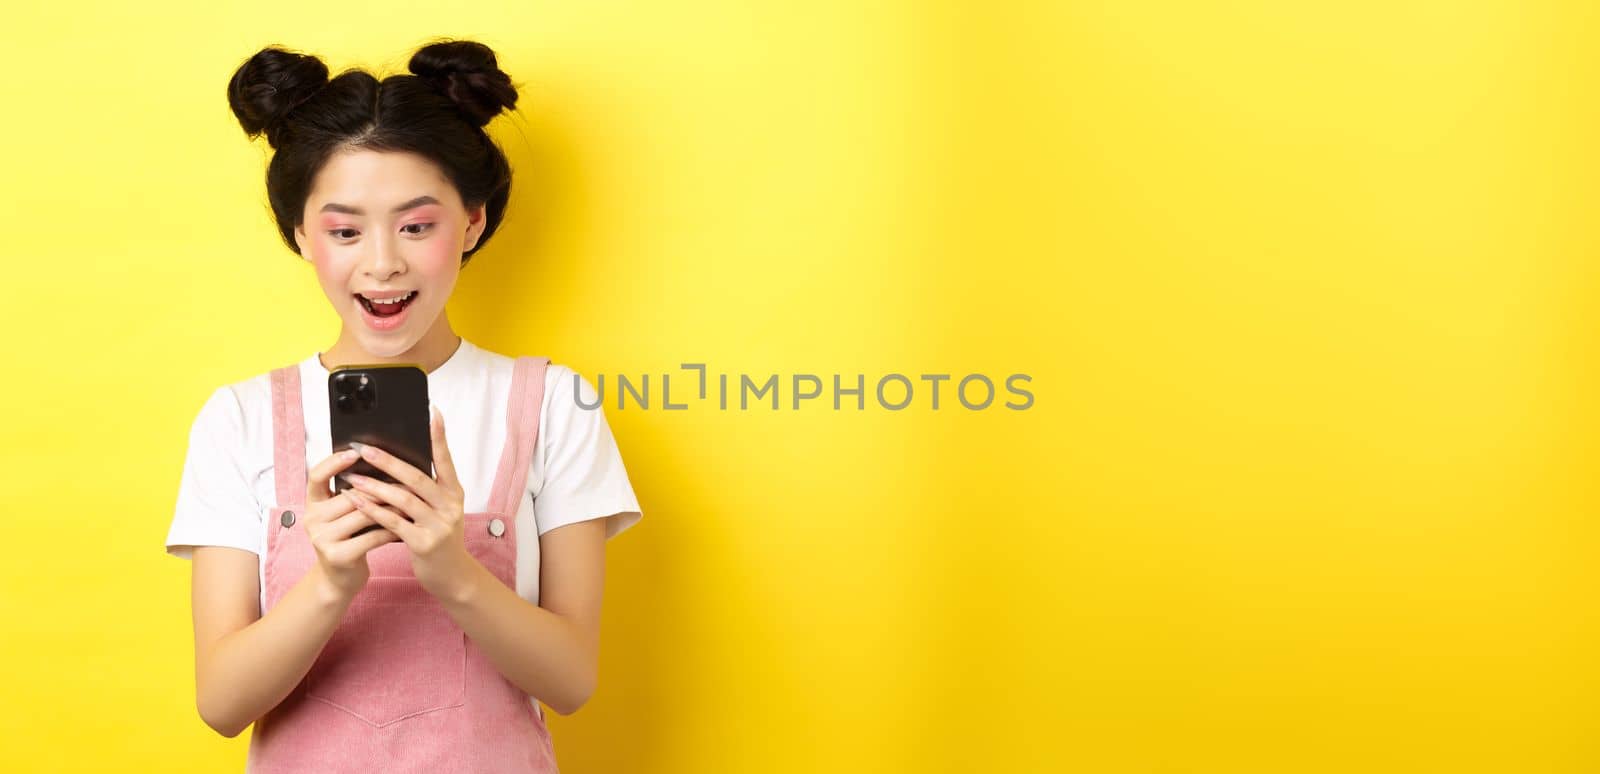 Pretty asian girl looking excited at screen, reading message on phone and smiling happy, standing in summer clothes on yellow background.